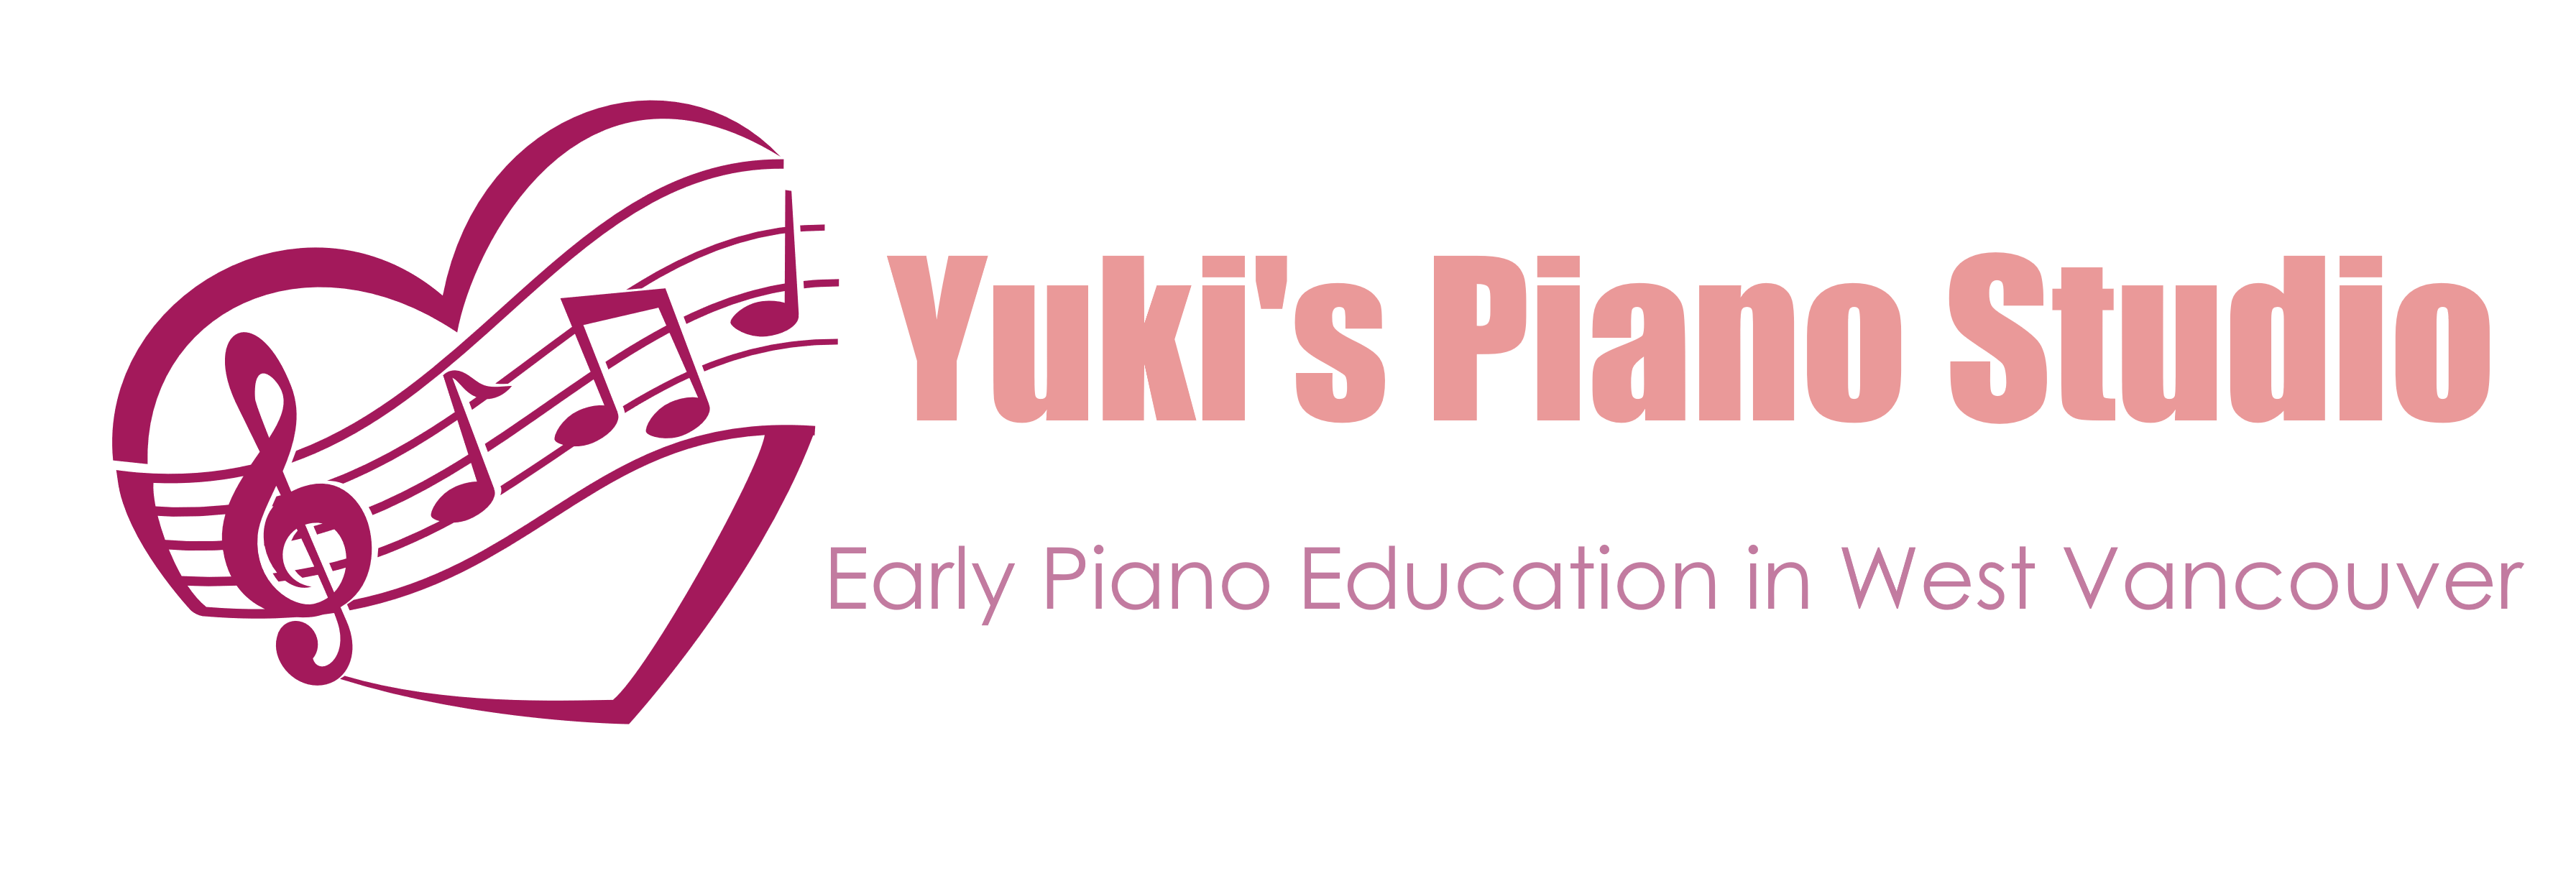 West Vancouver Piano Lessons BC | Zoom or Skype Online & Face-to-Face Piano Lessons for Piano Students Ages 3 and Up | Yuki's Piano Studio